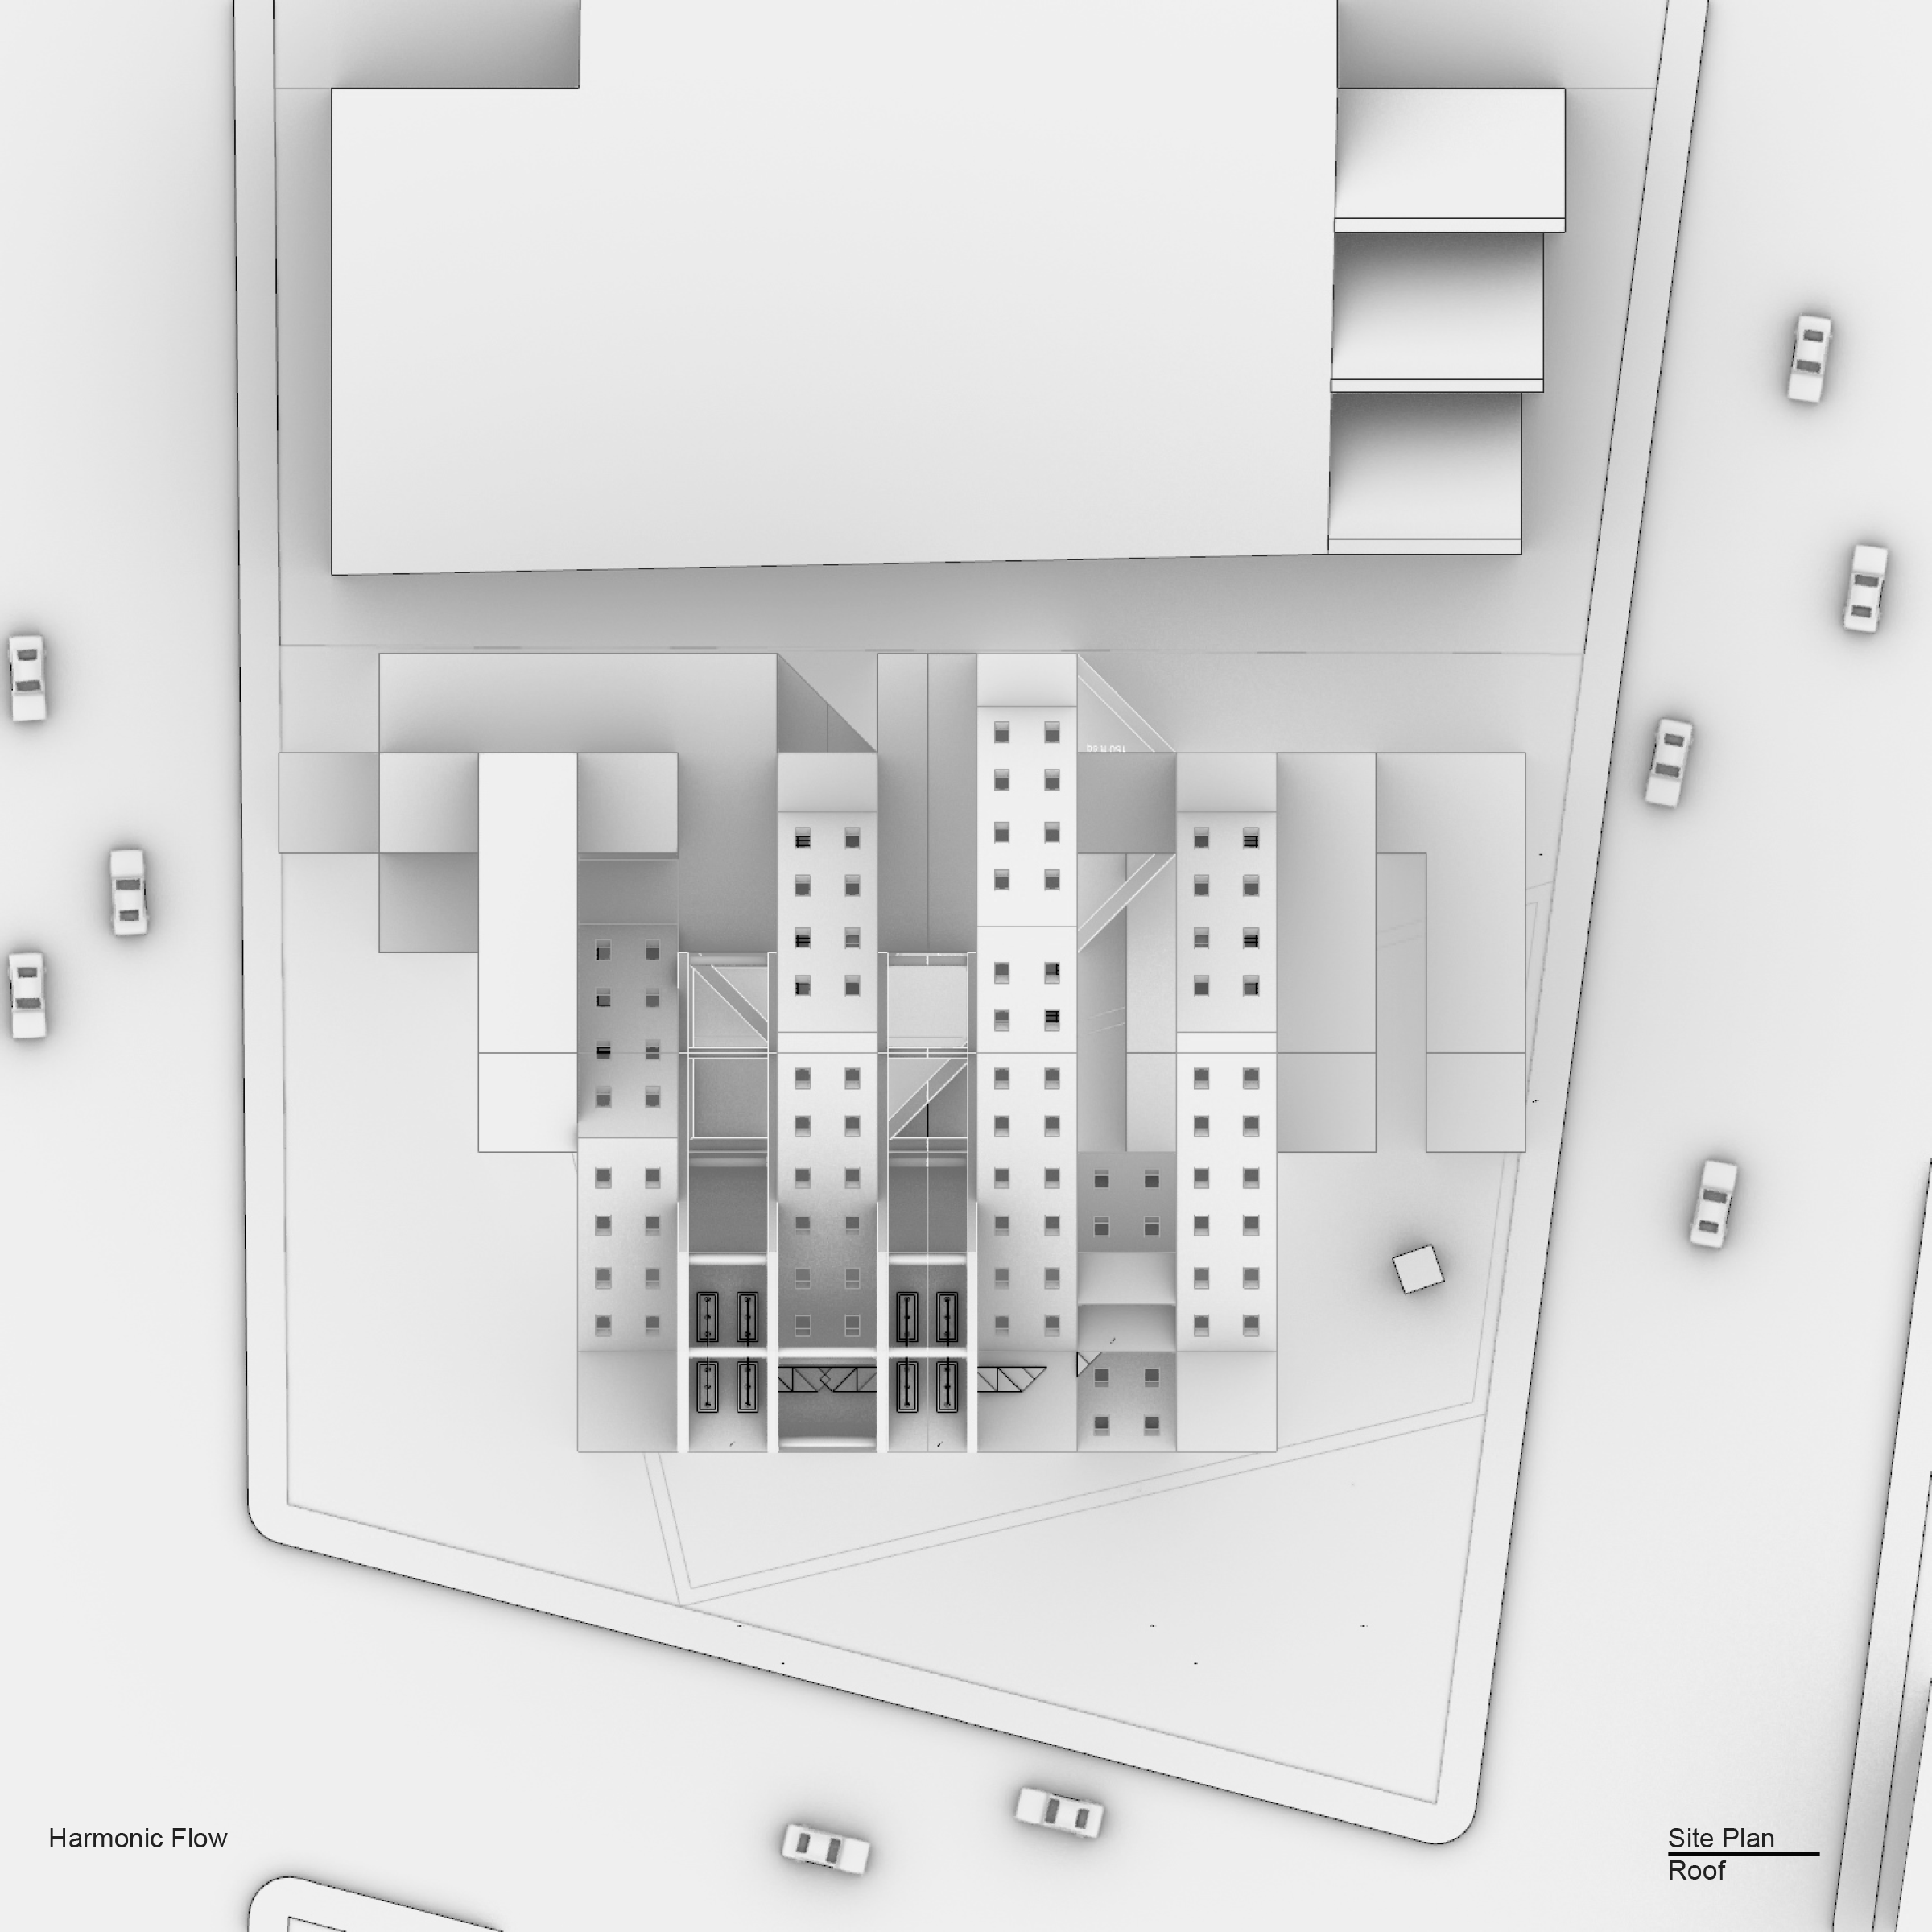 Site plan roof.png